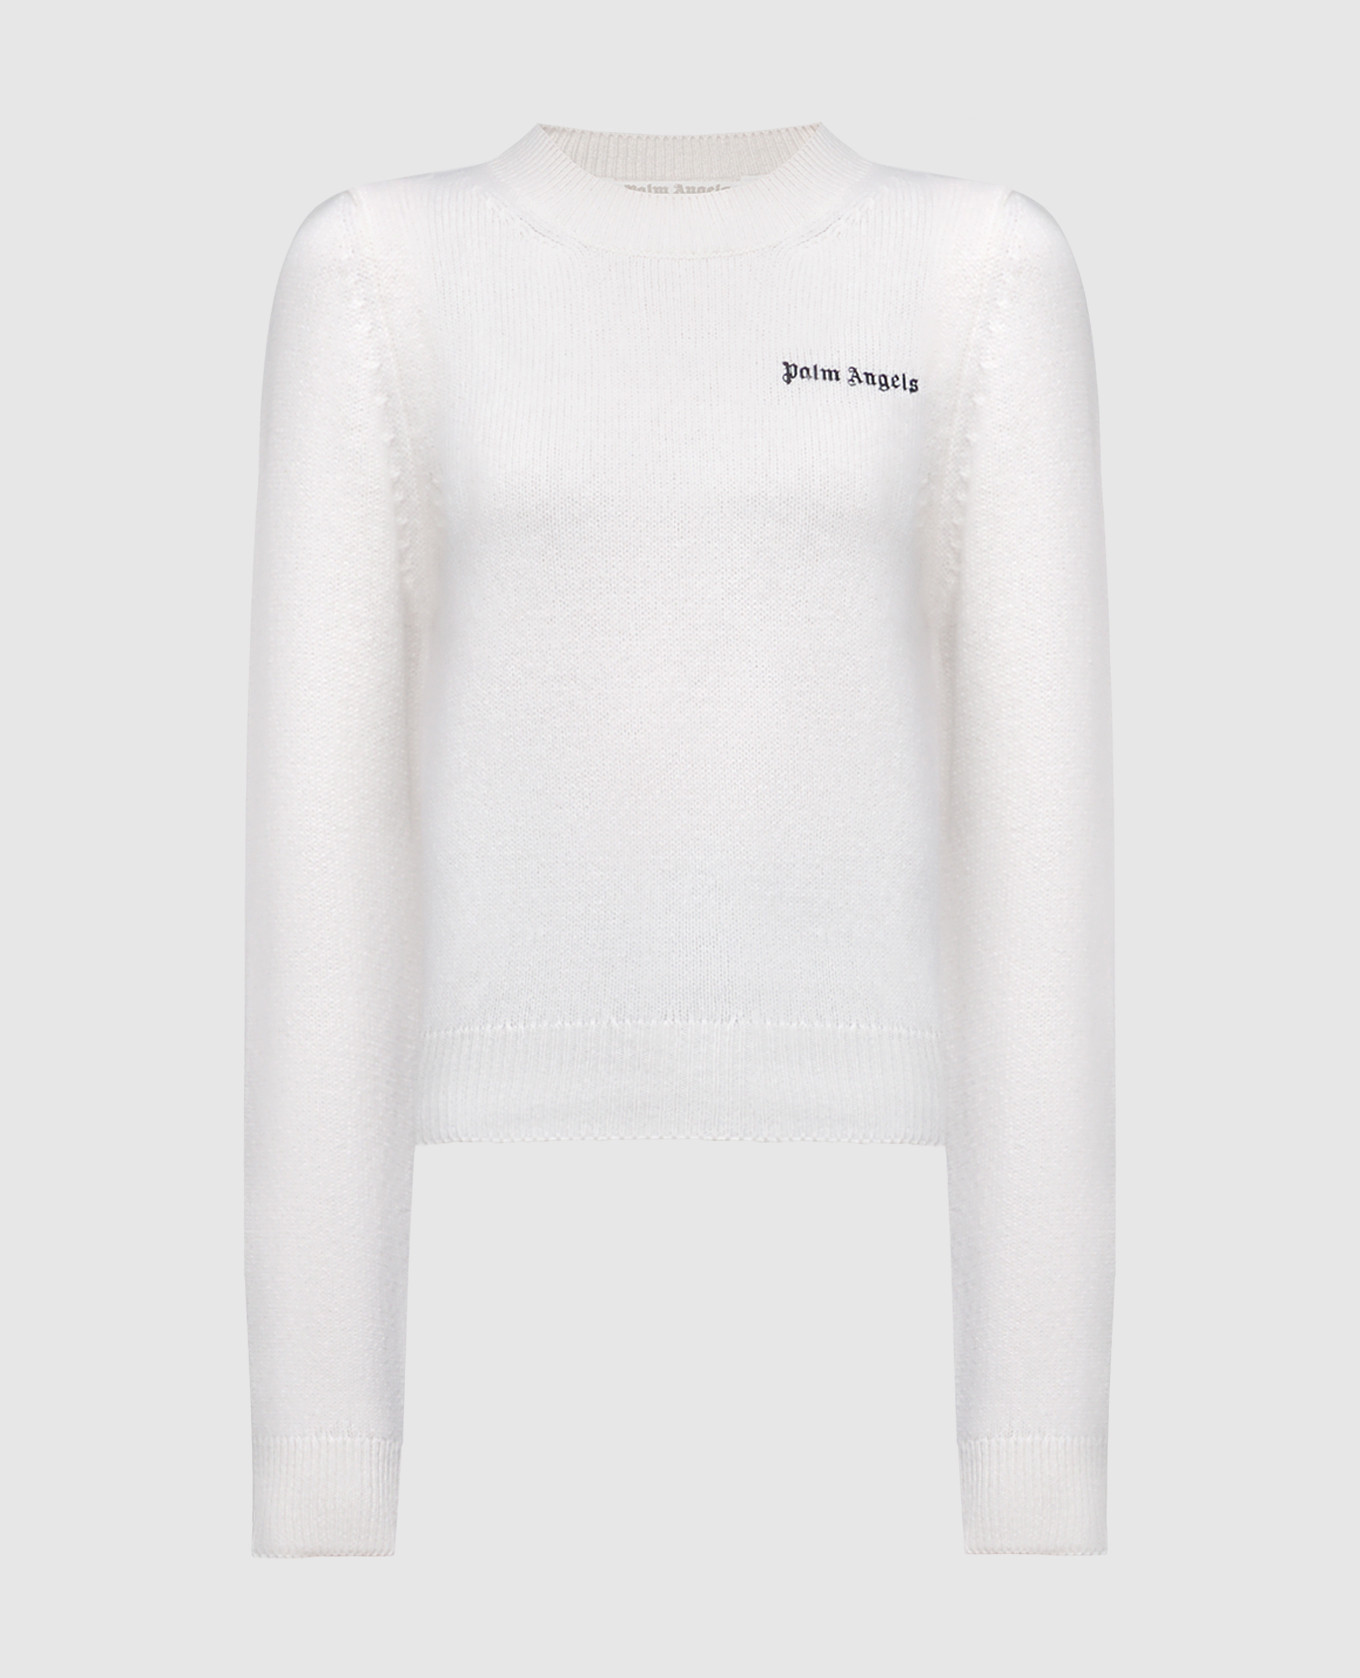 White sweater with logo